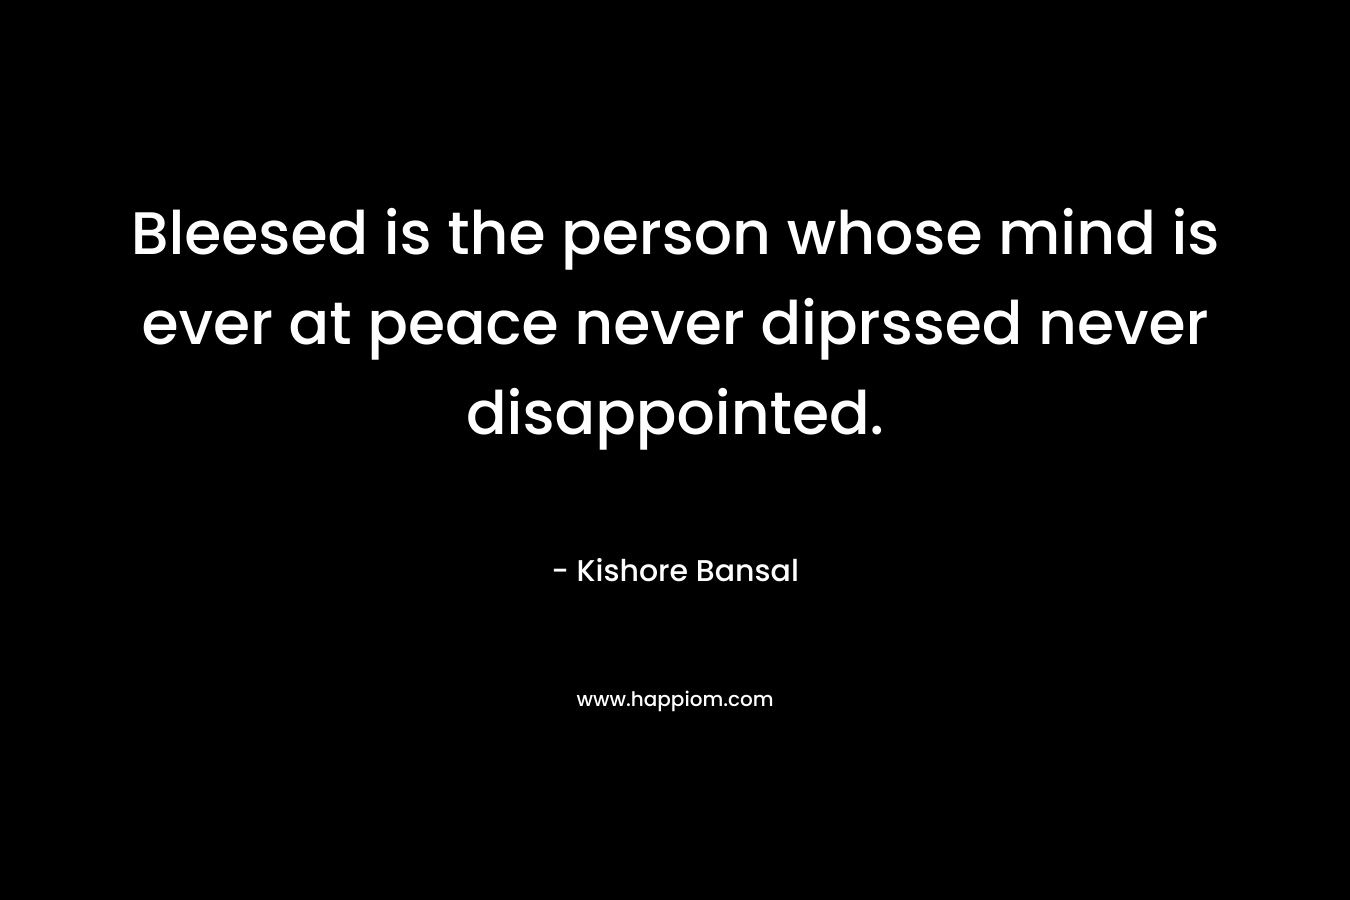 Bleesed is the person whose mind is ever at peace never diprssed never disappointed.